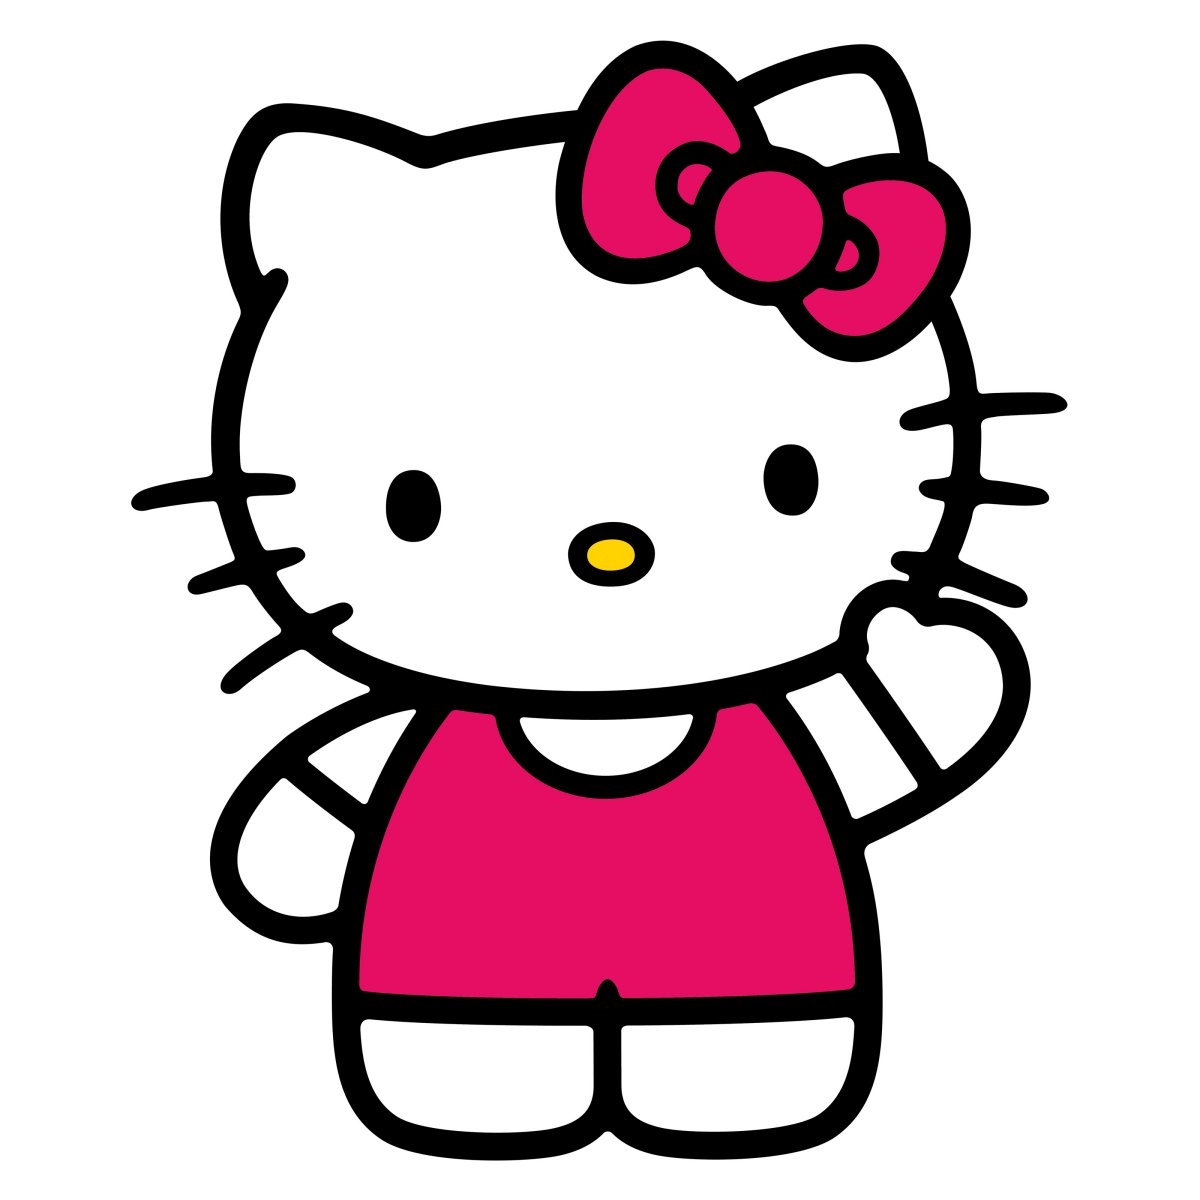 https://static.wikia.nocookie.net/sanrio/images/9/9f/Hello_Kitty.jpg/revision/latest?cb=20191128154539